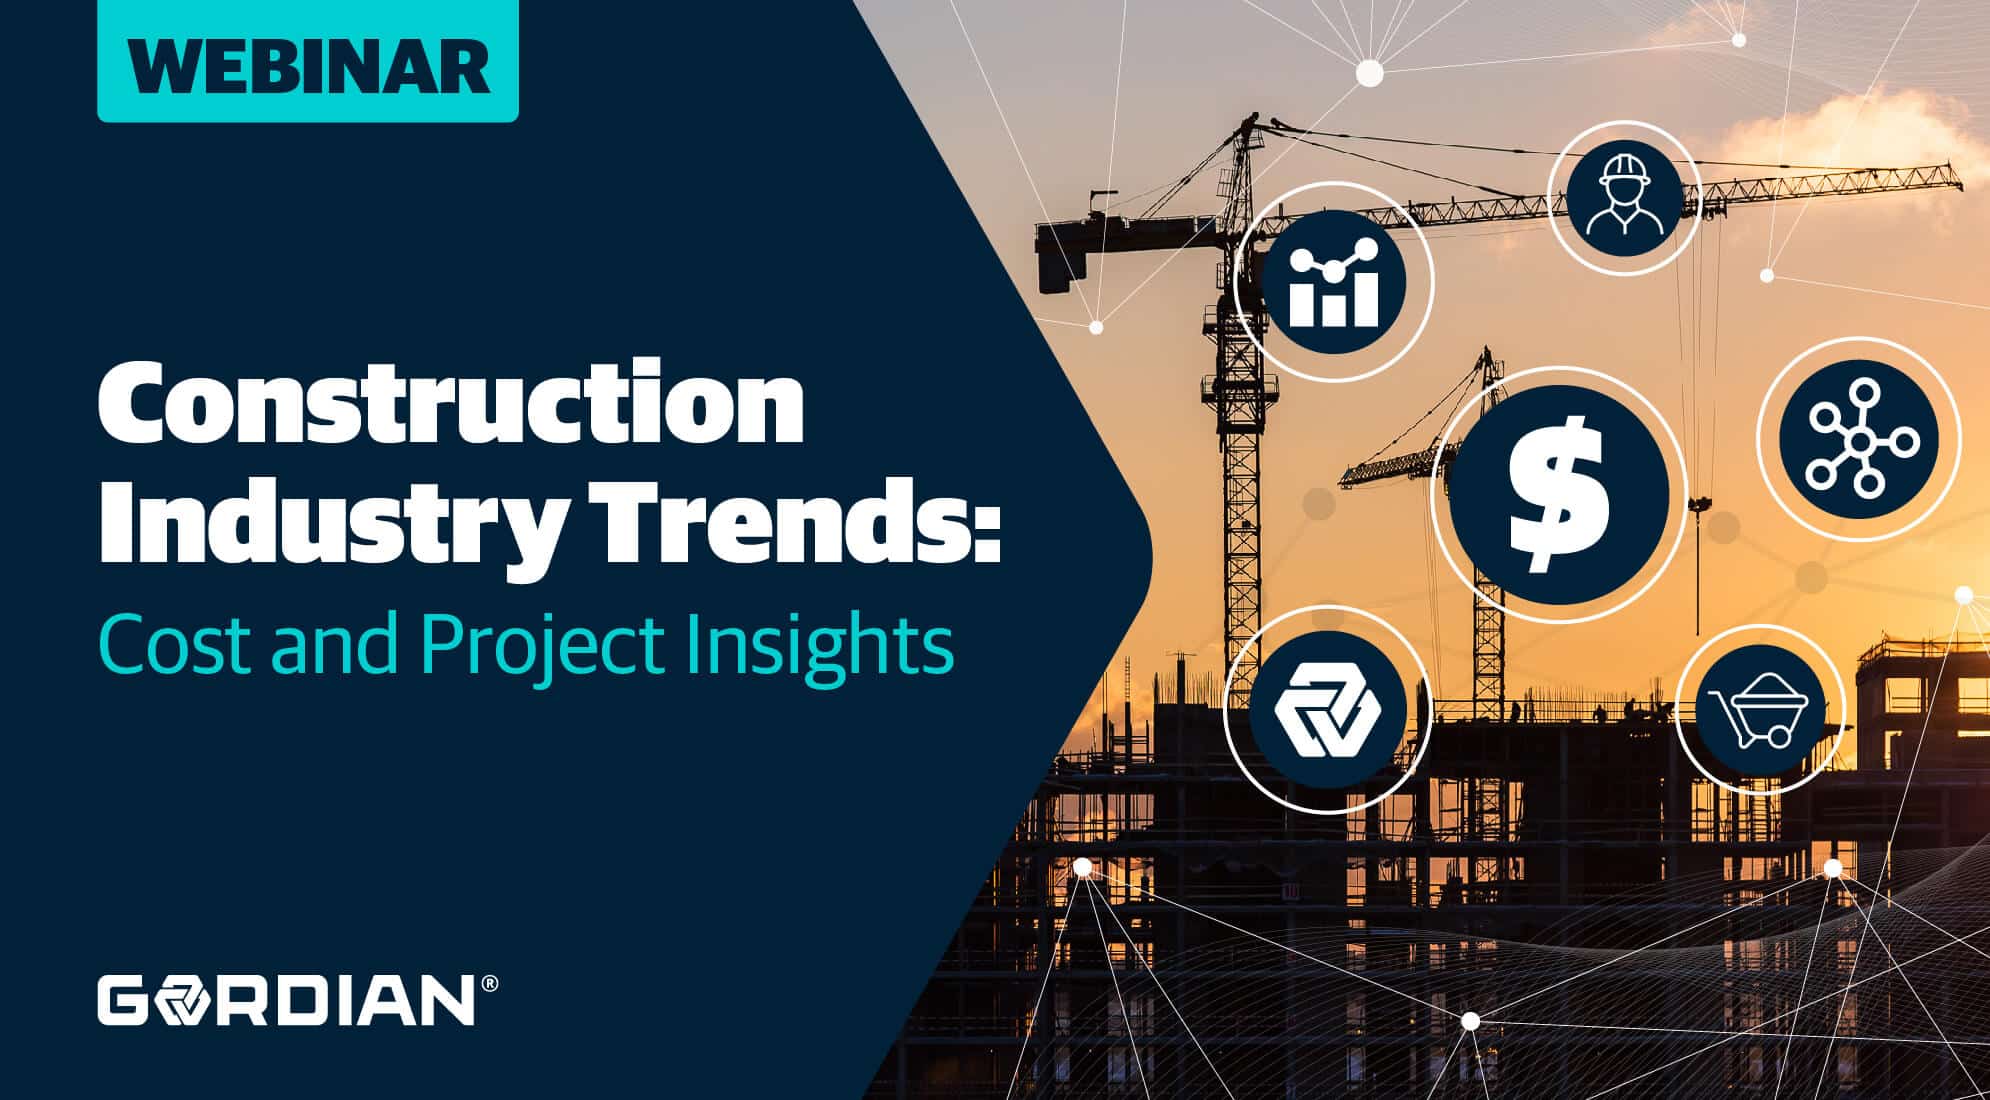 Construction Industry Trends: Cost and Project Insights 4